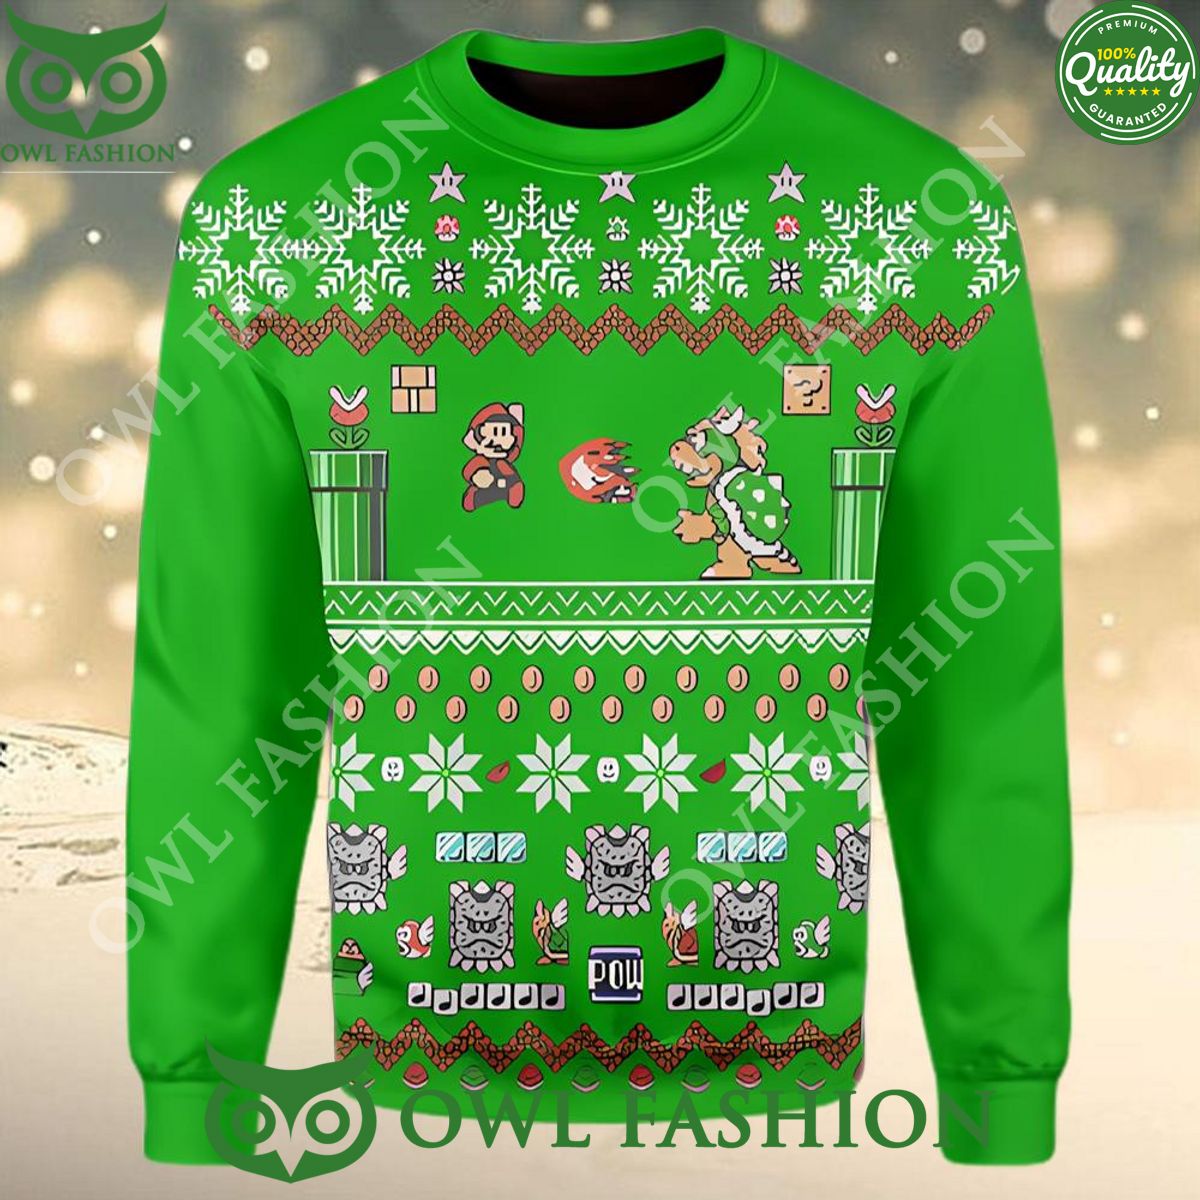 Super Mario Ugly Xmas Sweater Jumper Best click of yours